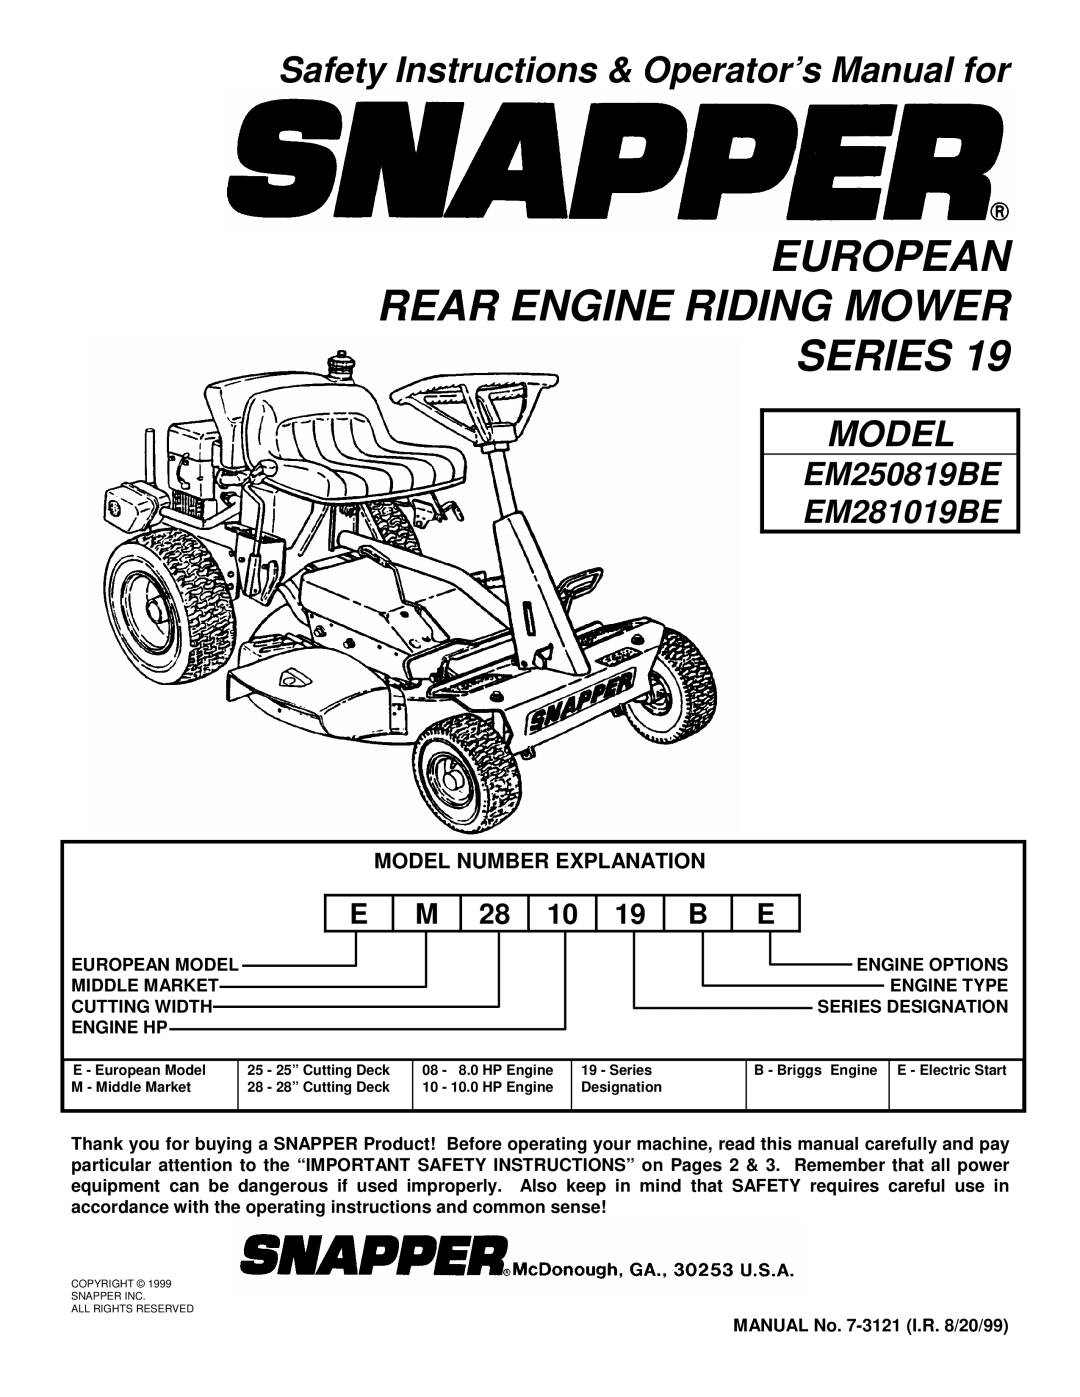 Snapper EM250819BE, EM281019BE important safety instructions European Rear Engine Riding Mower Series 